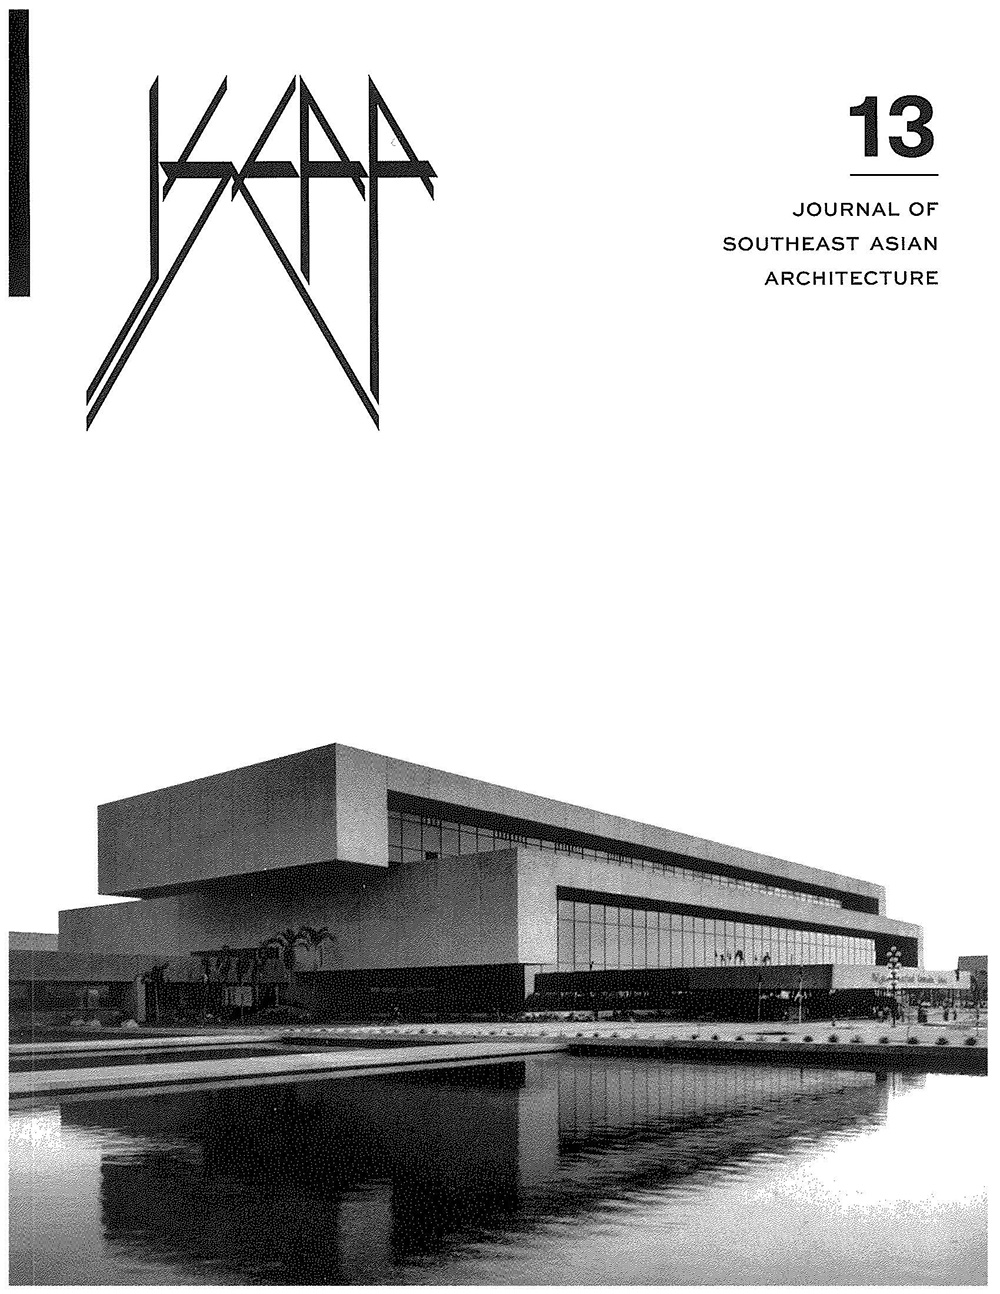 Journal of Southeast Asian Architecture Vol. 13